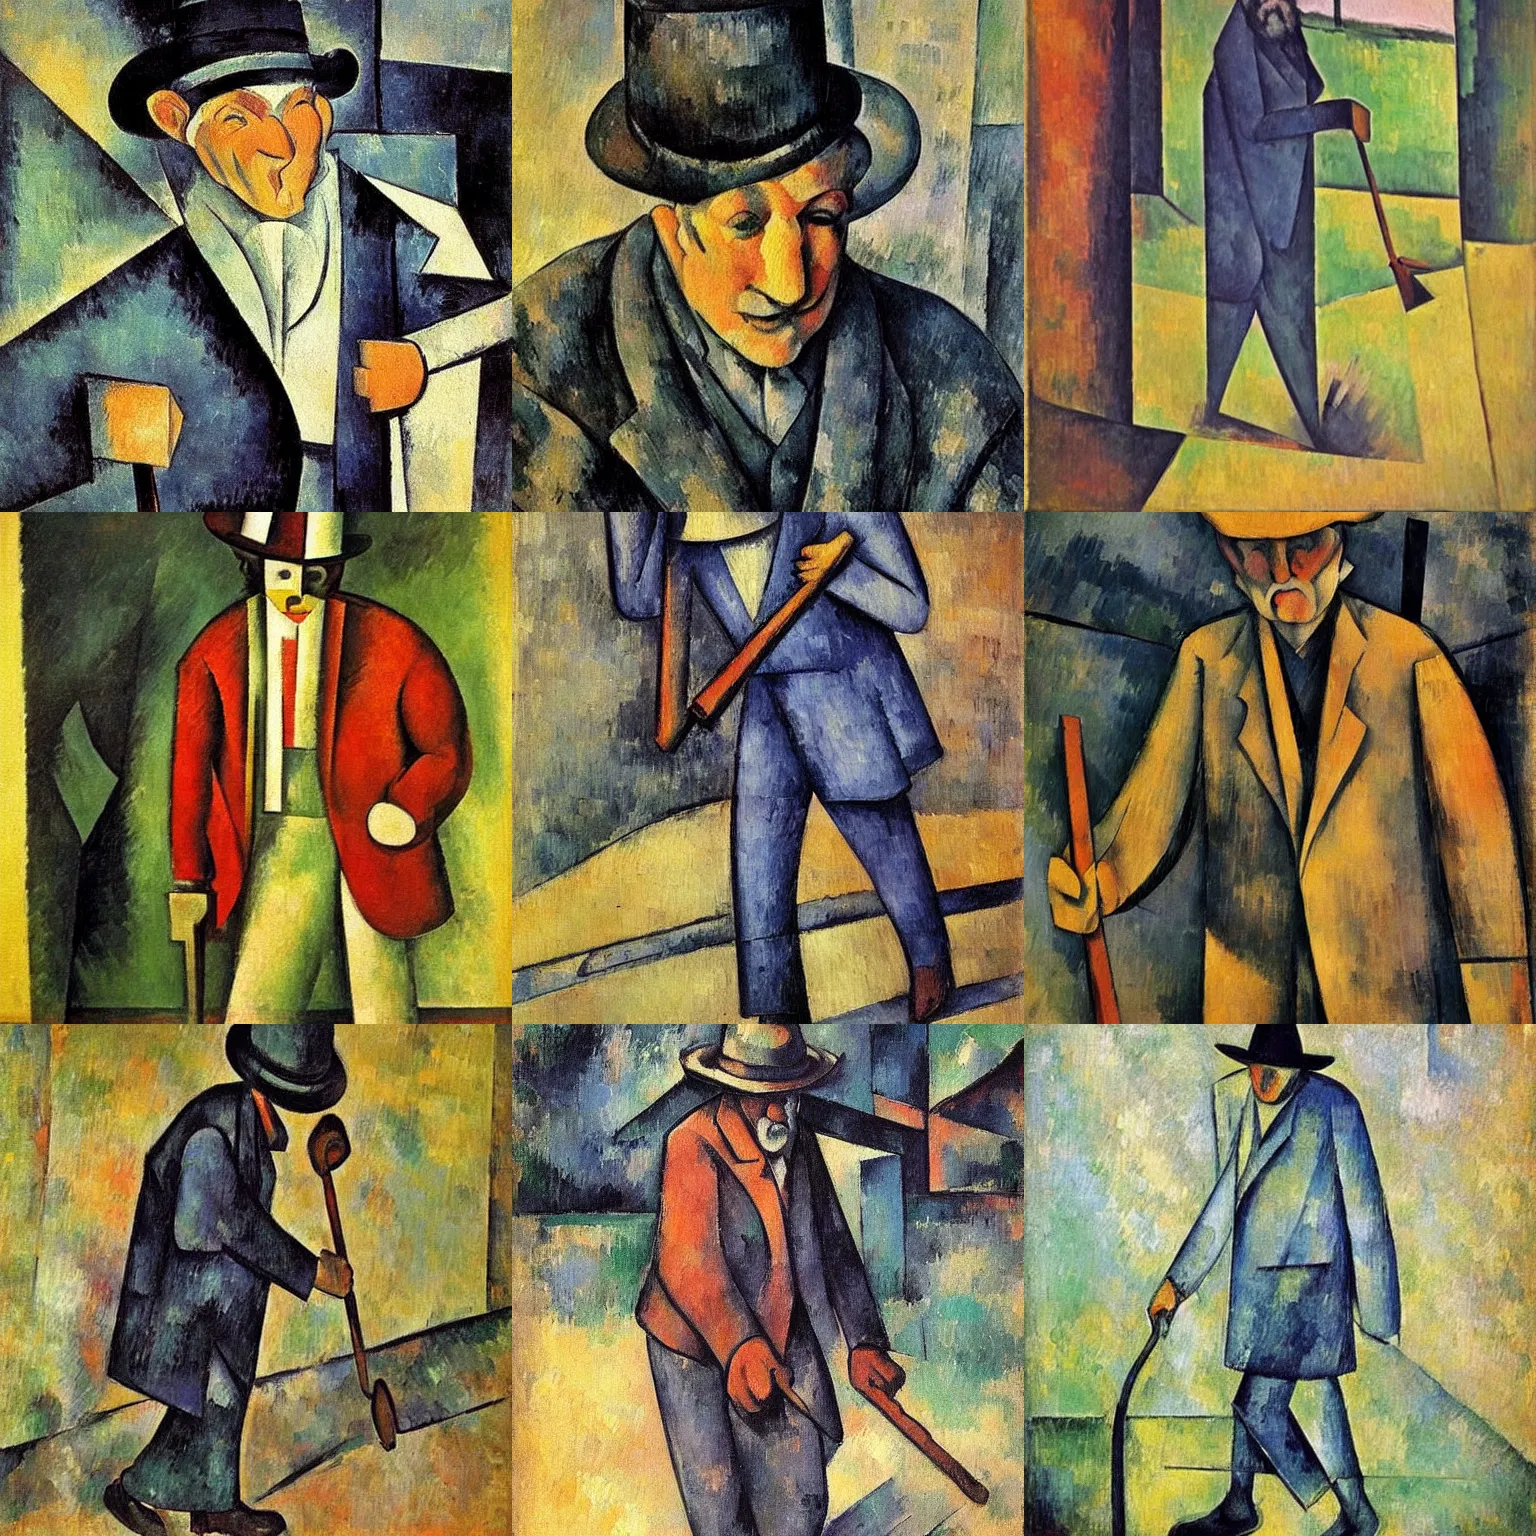 Prompt: a painting depicting an old man holding a hat and walking stick, a cubist painting by cezanne, featured on pinterest, synthetism, picasso, fresco, detailed painting